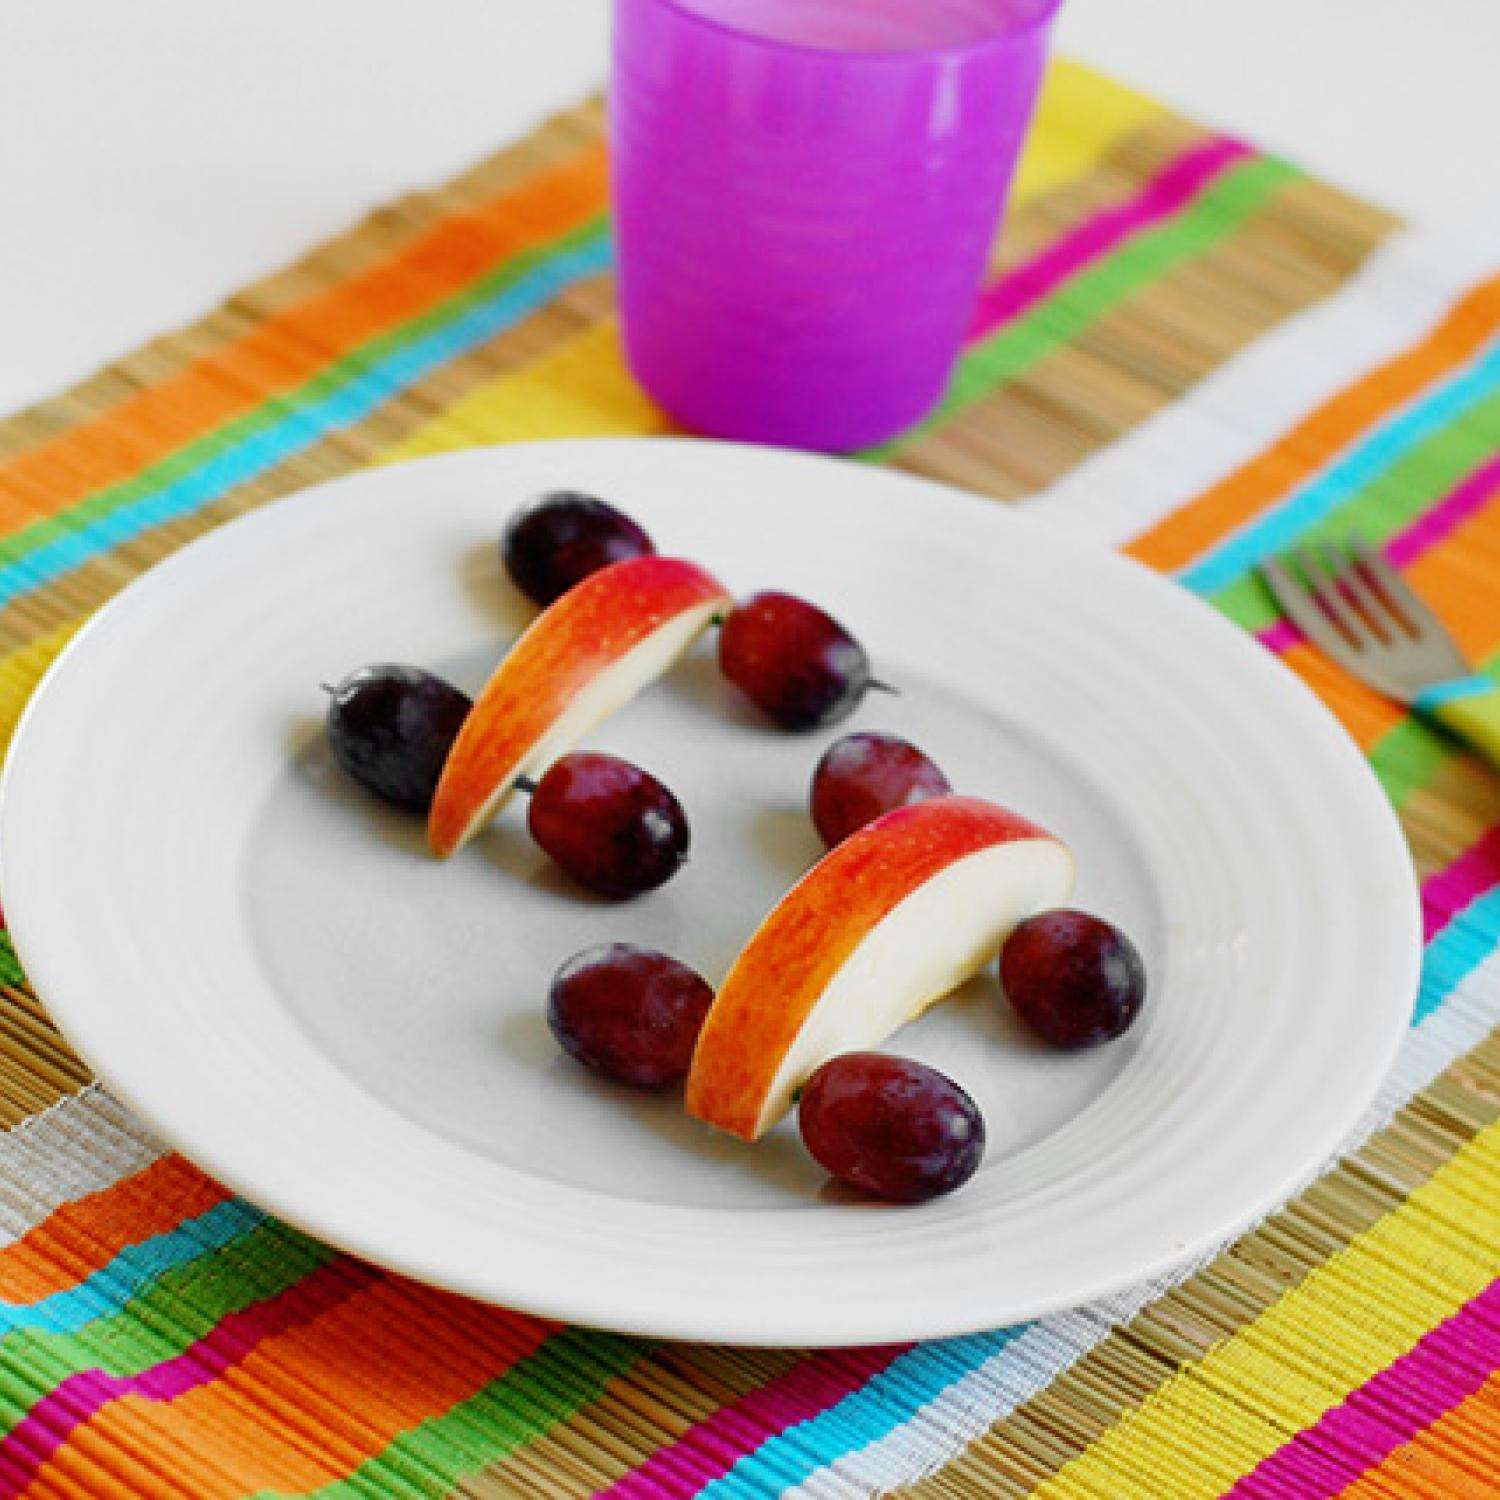 Healthy Fun Snacks For Kids
 10 Creative & Healthy Snacks For Kids